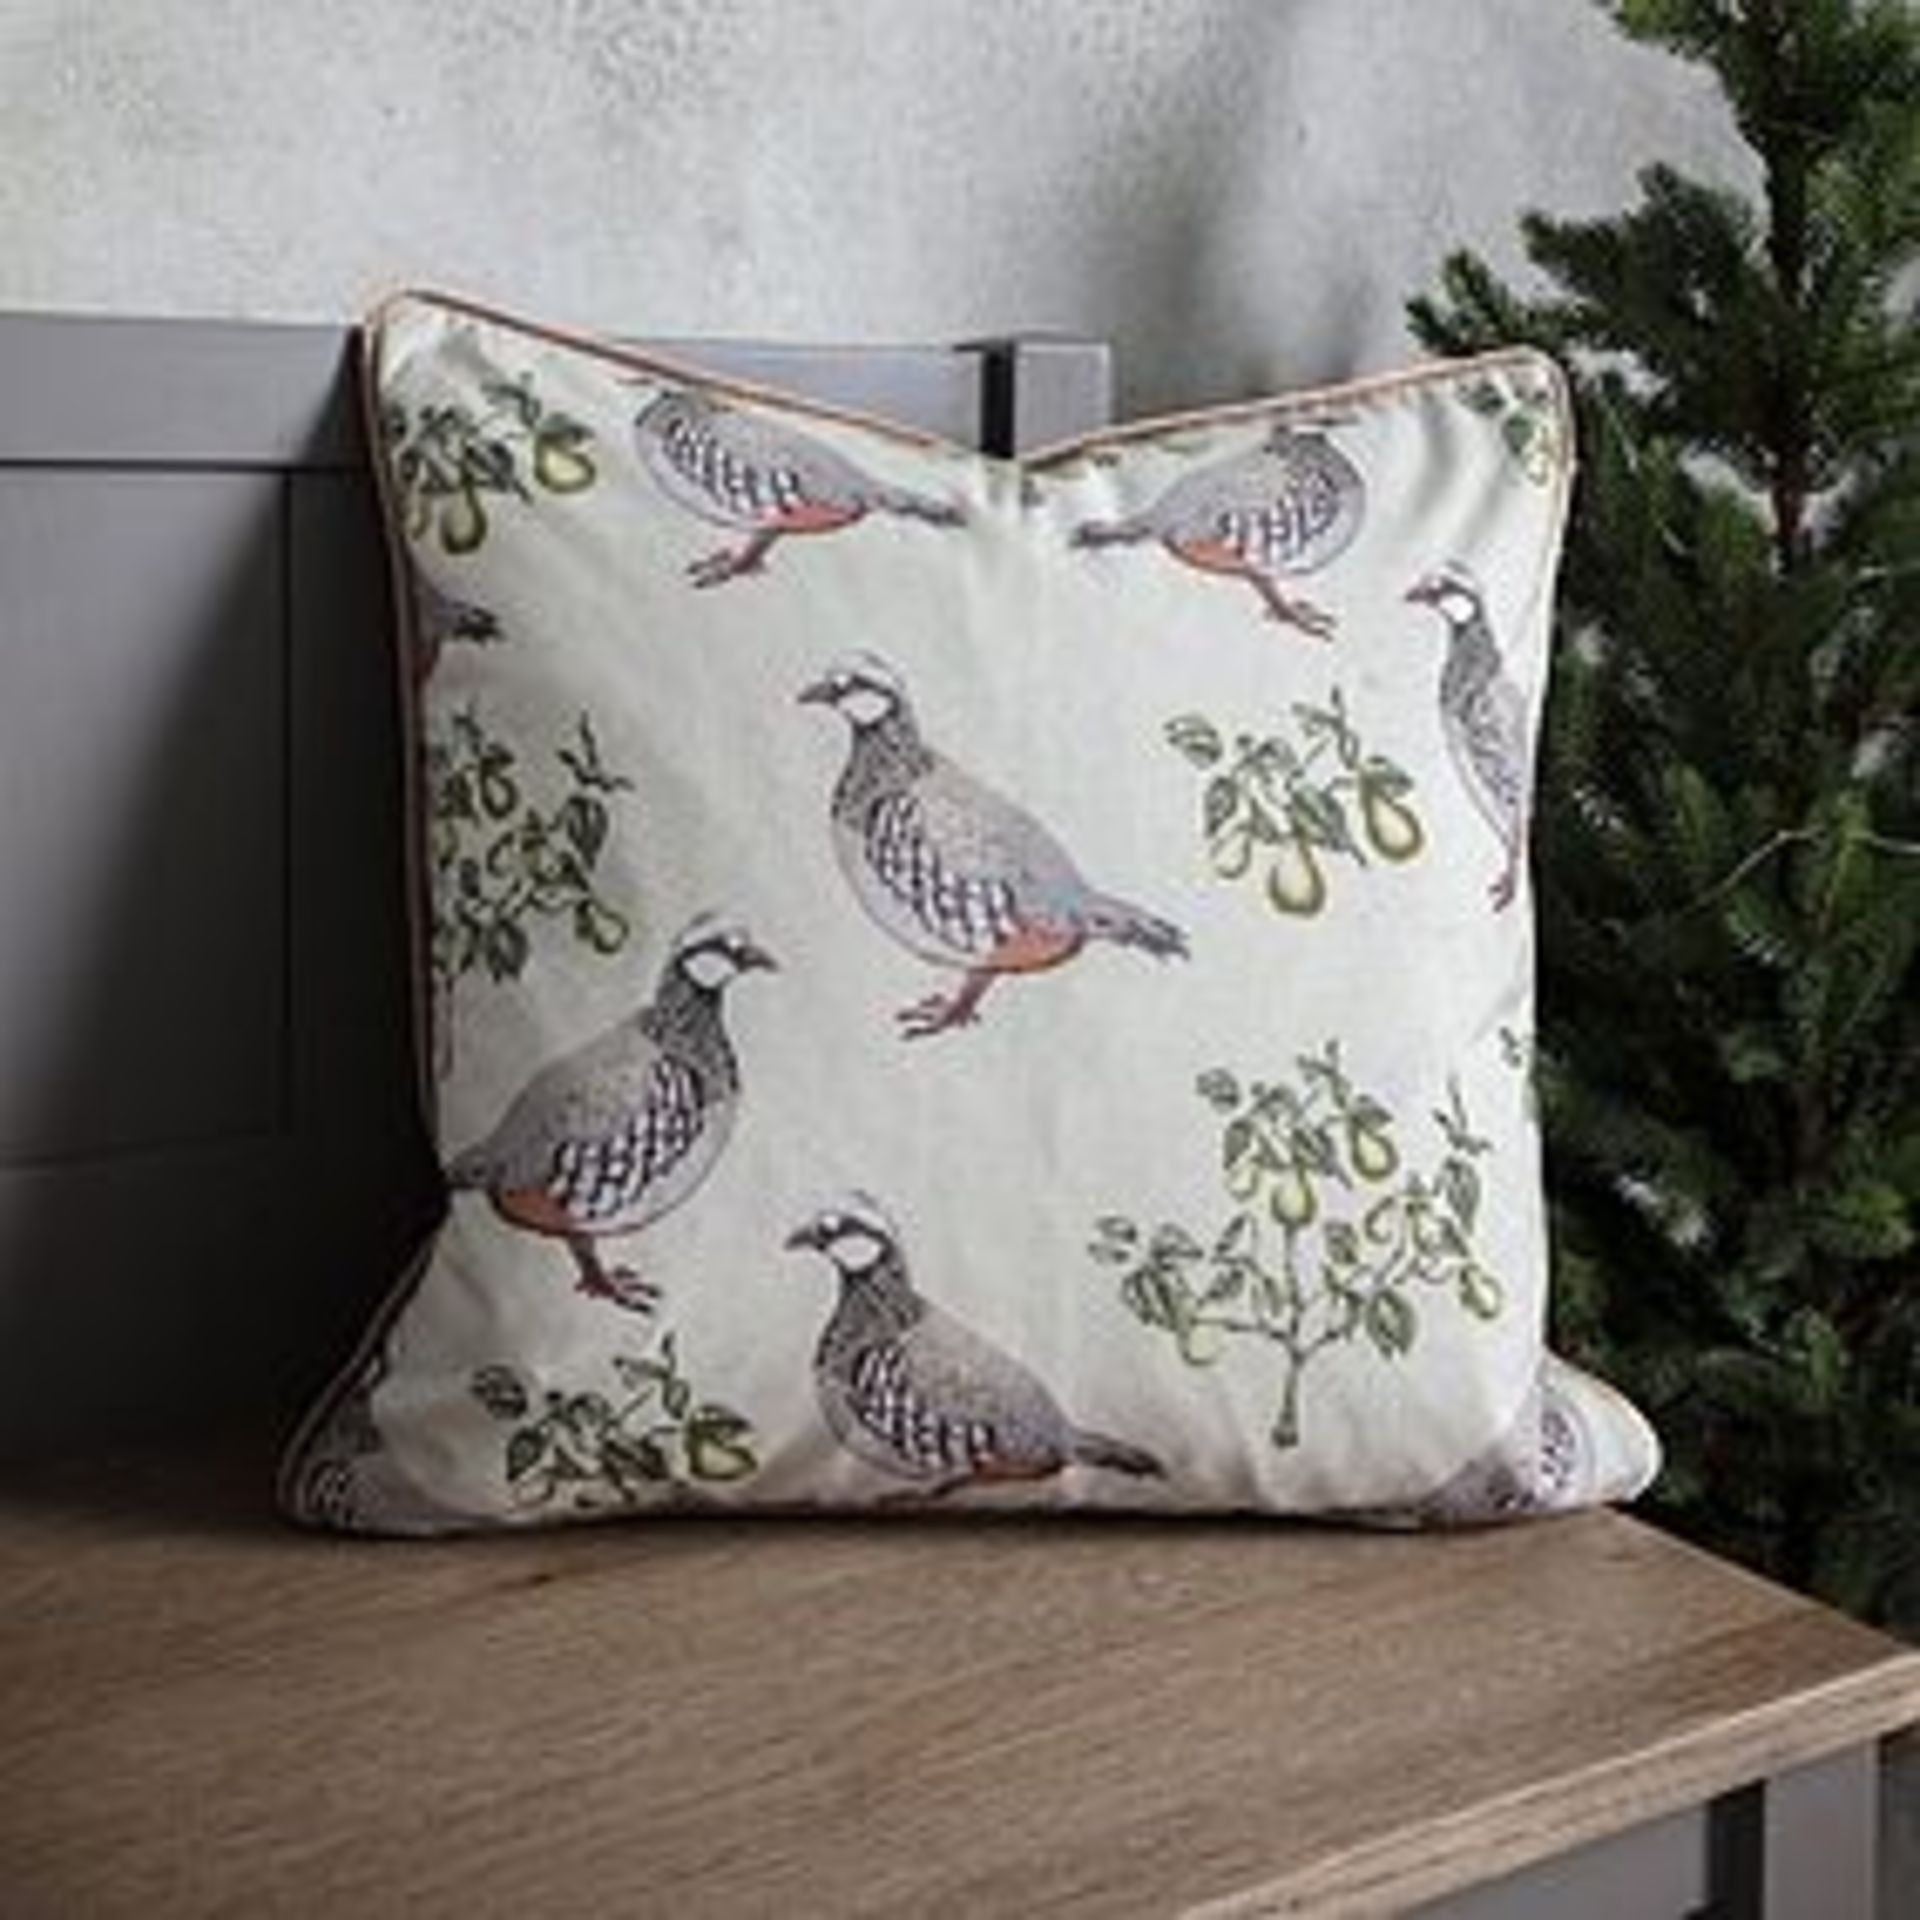 Feather Filled Cushion - Image 2 of 2